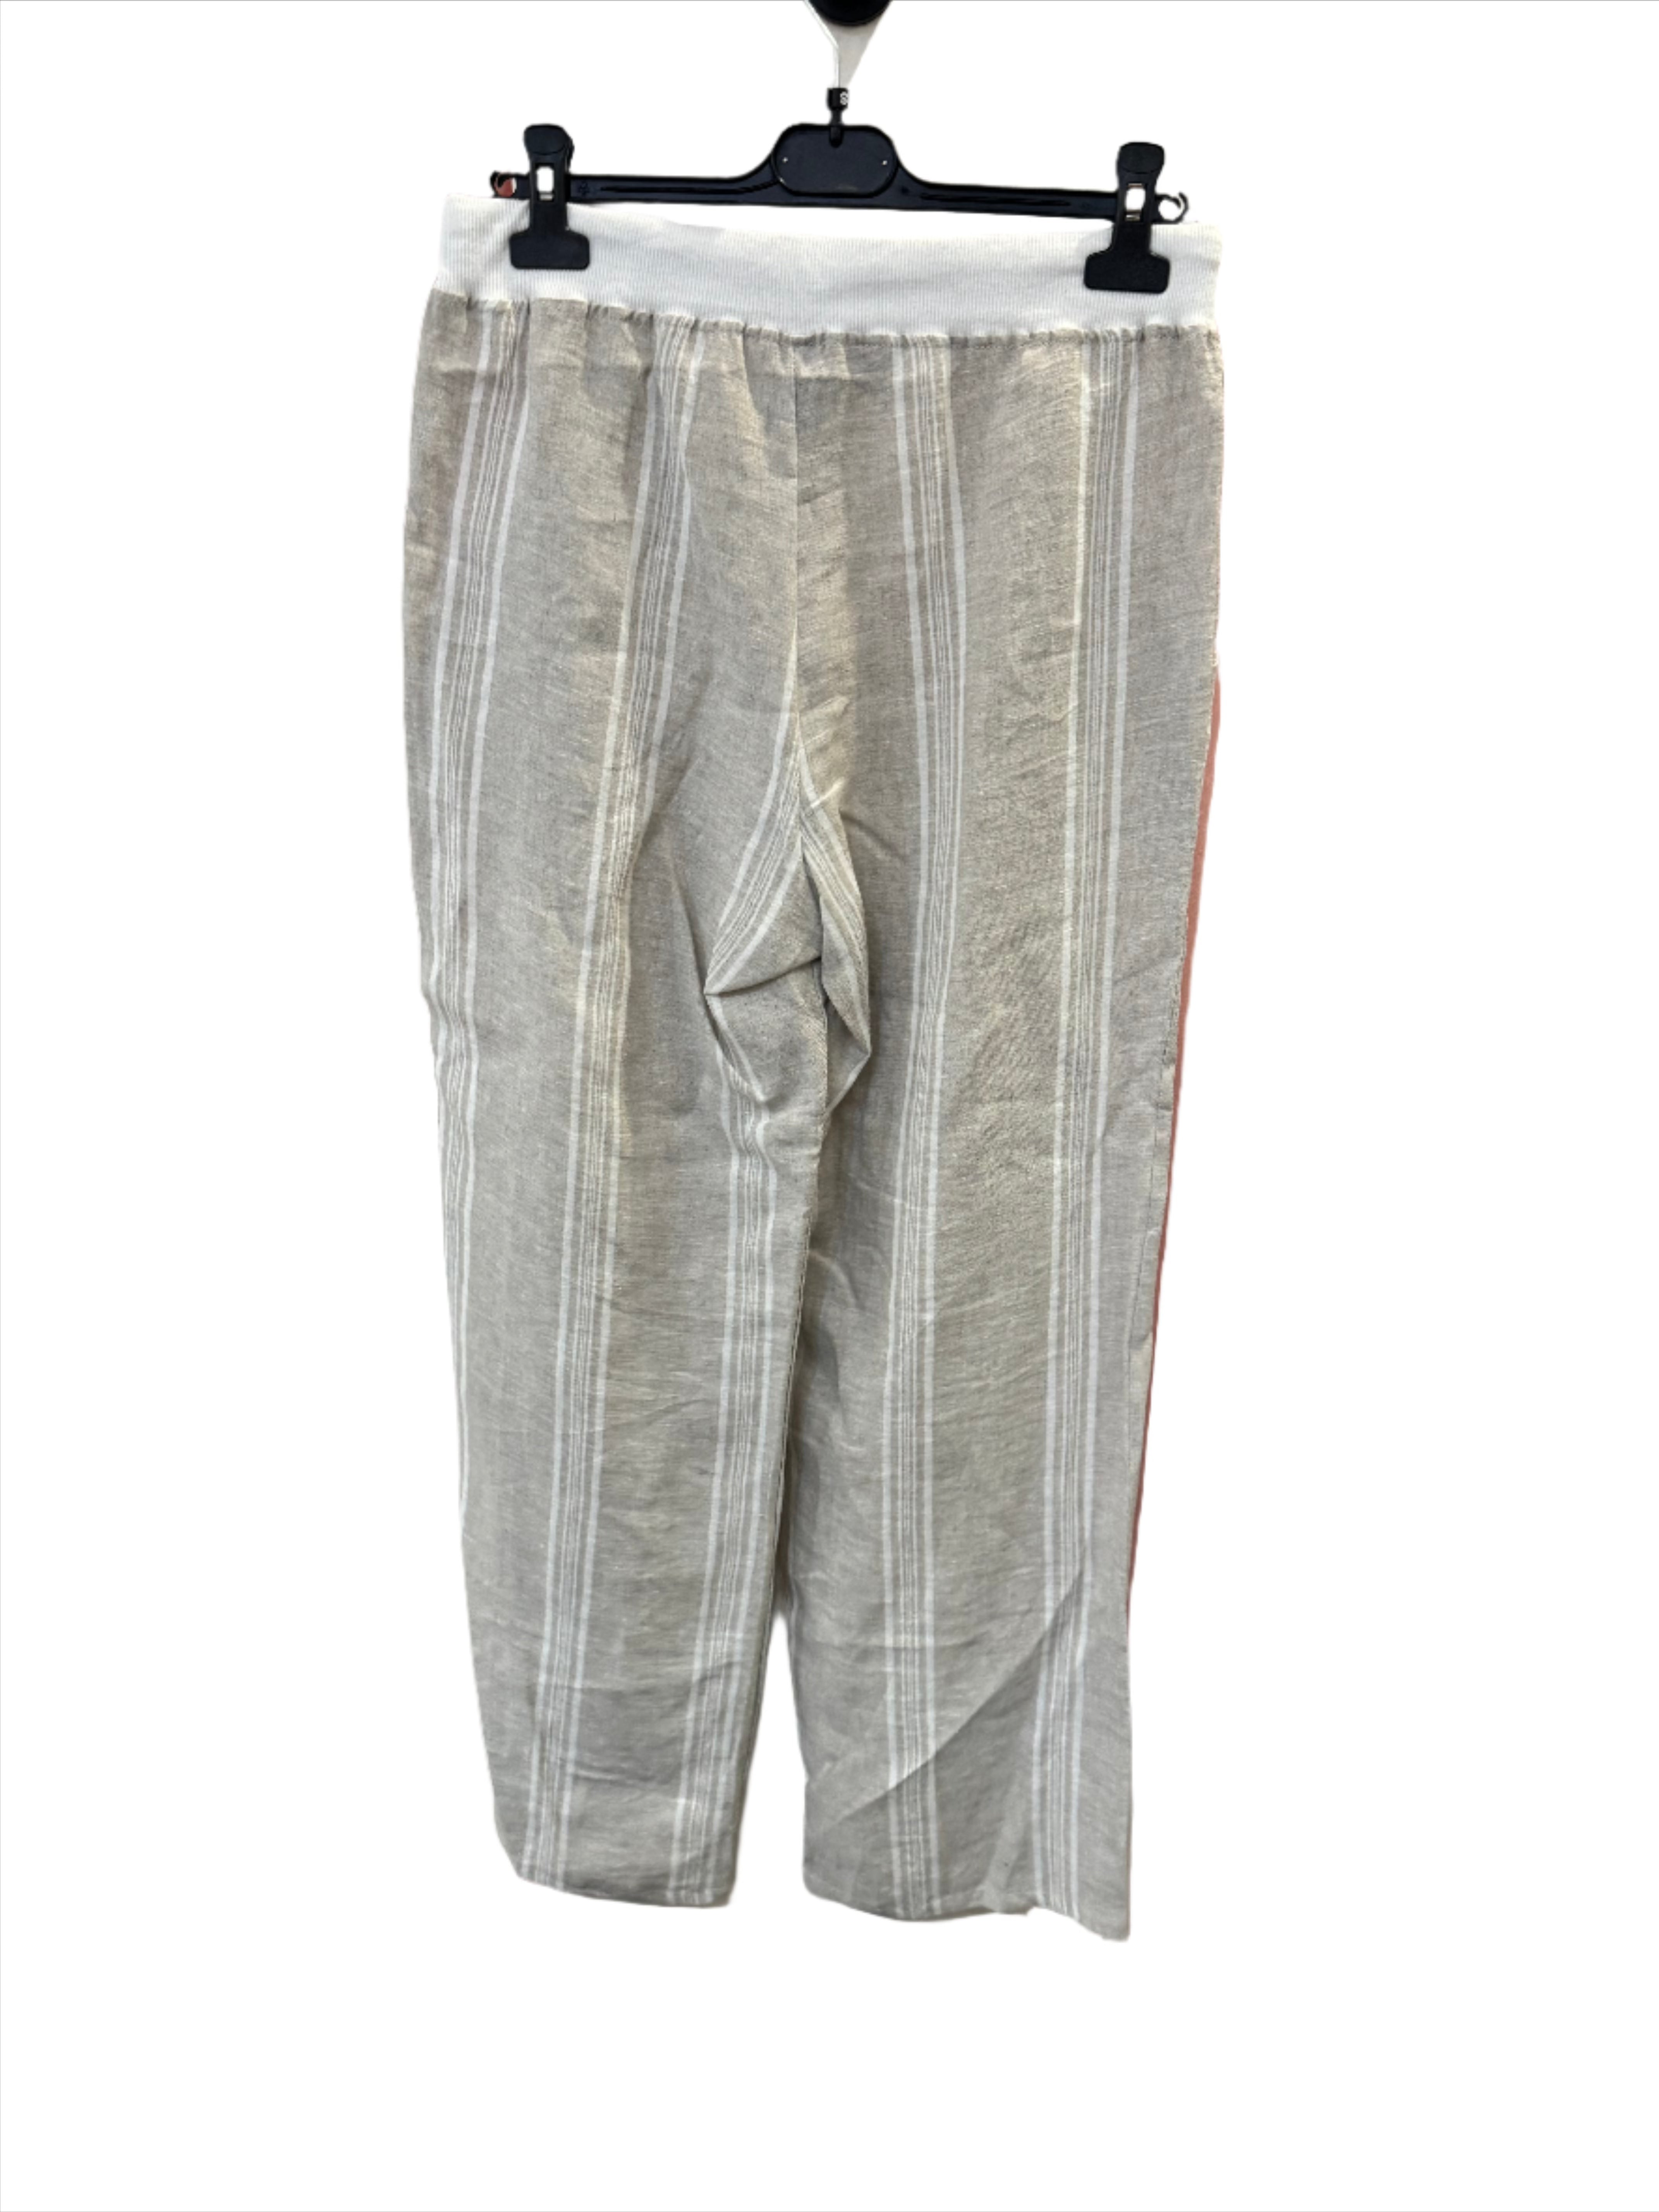 Inizio Linen Draw String Pant